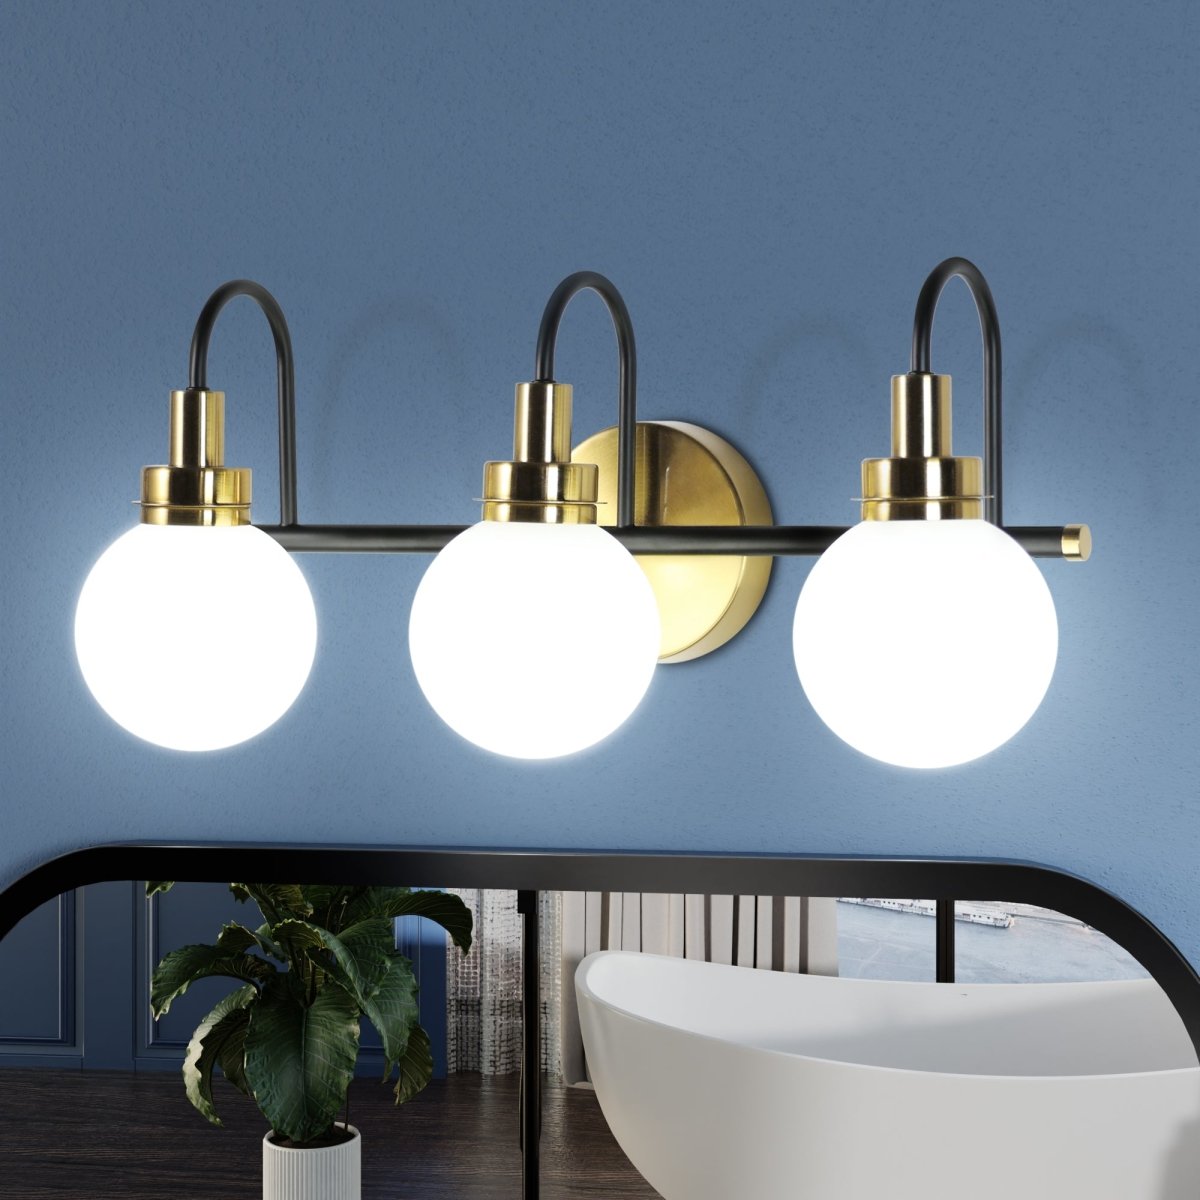 ExBrite Farmhouse Style 3-Light LED Vanity Light Fixture with Dimmable Switch